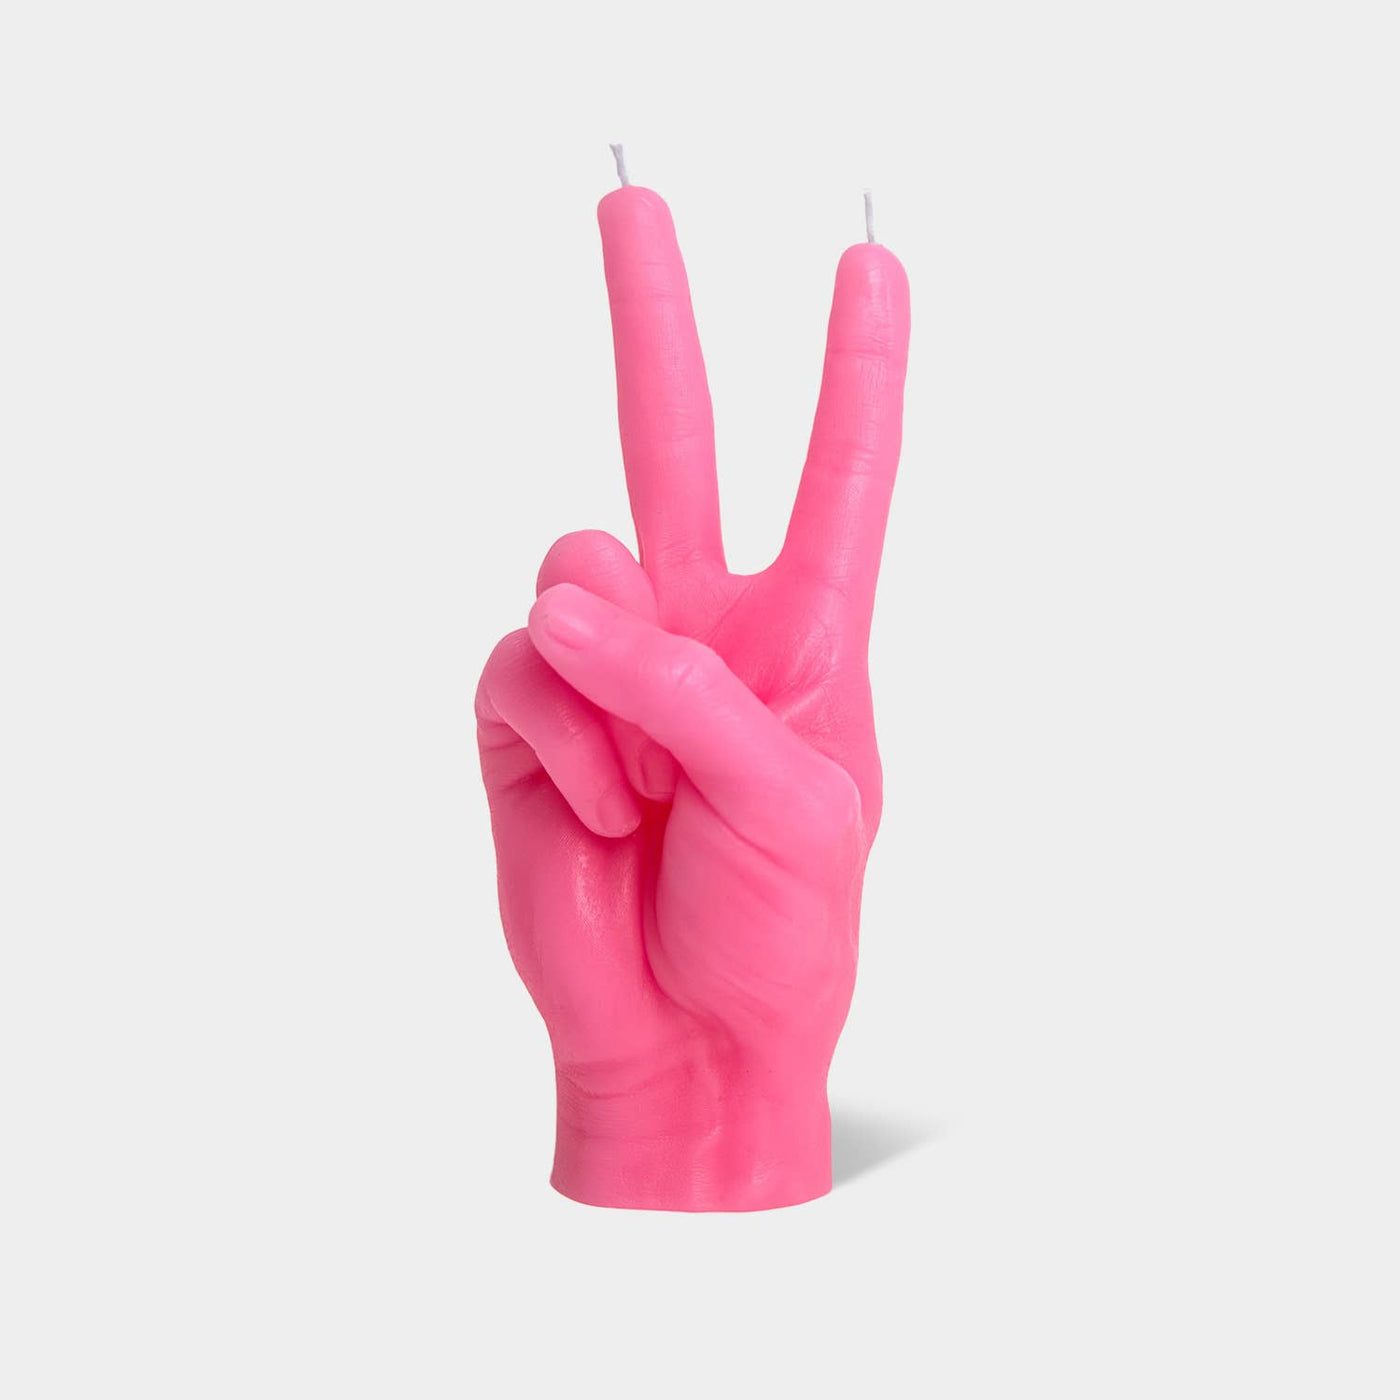 54 Celsius - CandleHand Hand Gesture Candle - Victory/Peace